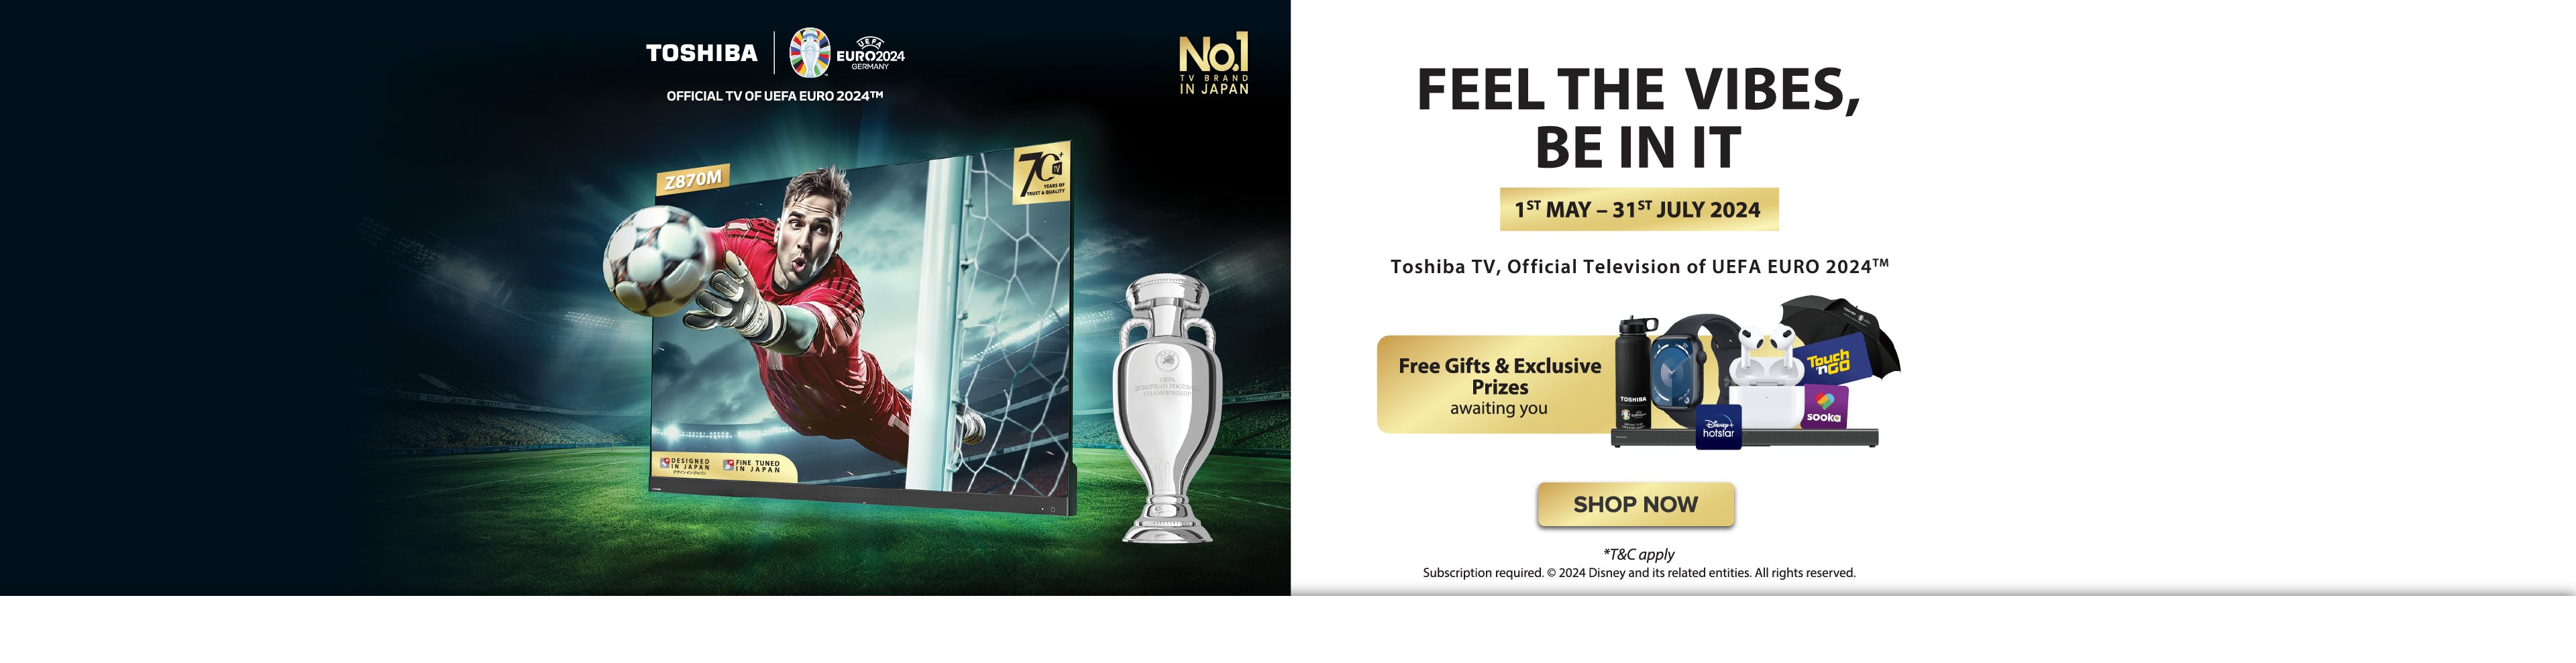 Toshiba Euro Cup Promotion